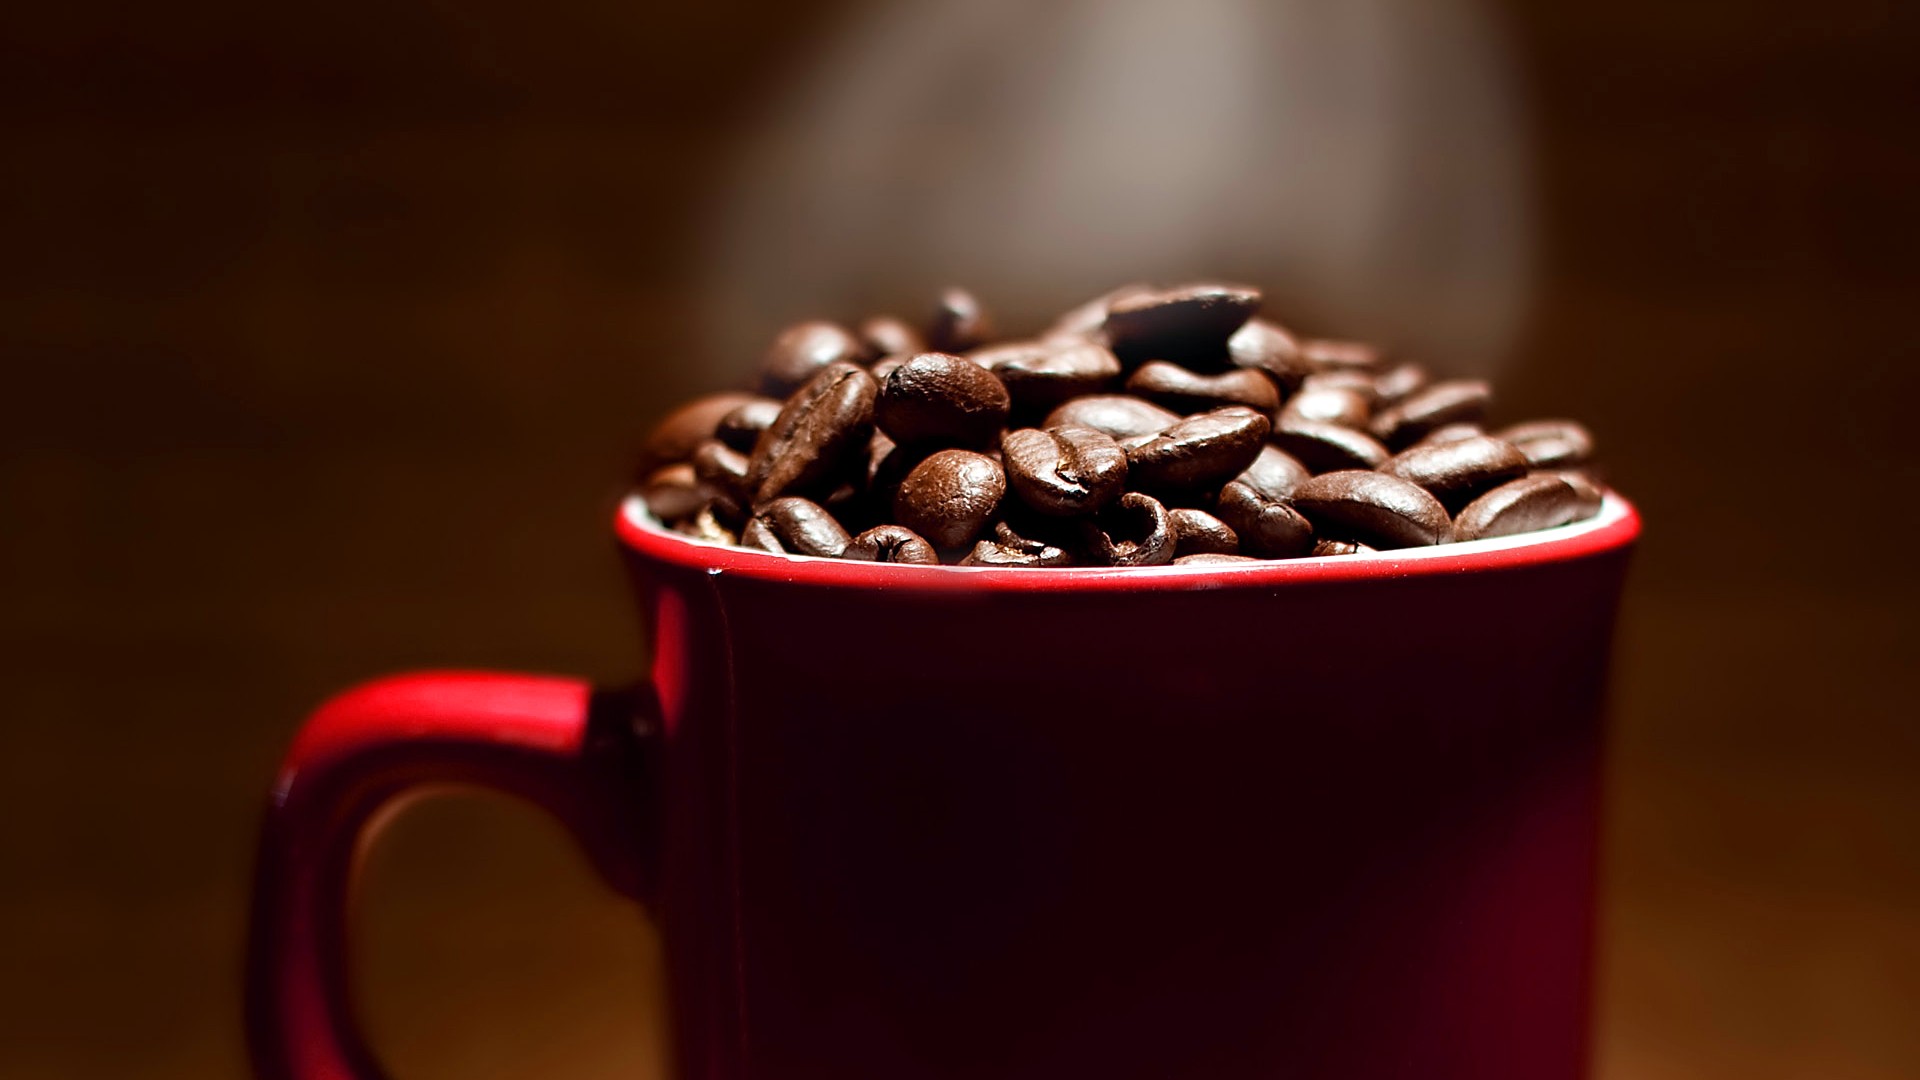 General 1920x1080 coffee cup coffee beans food